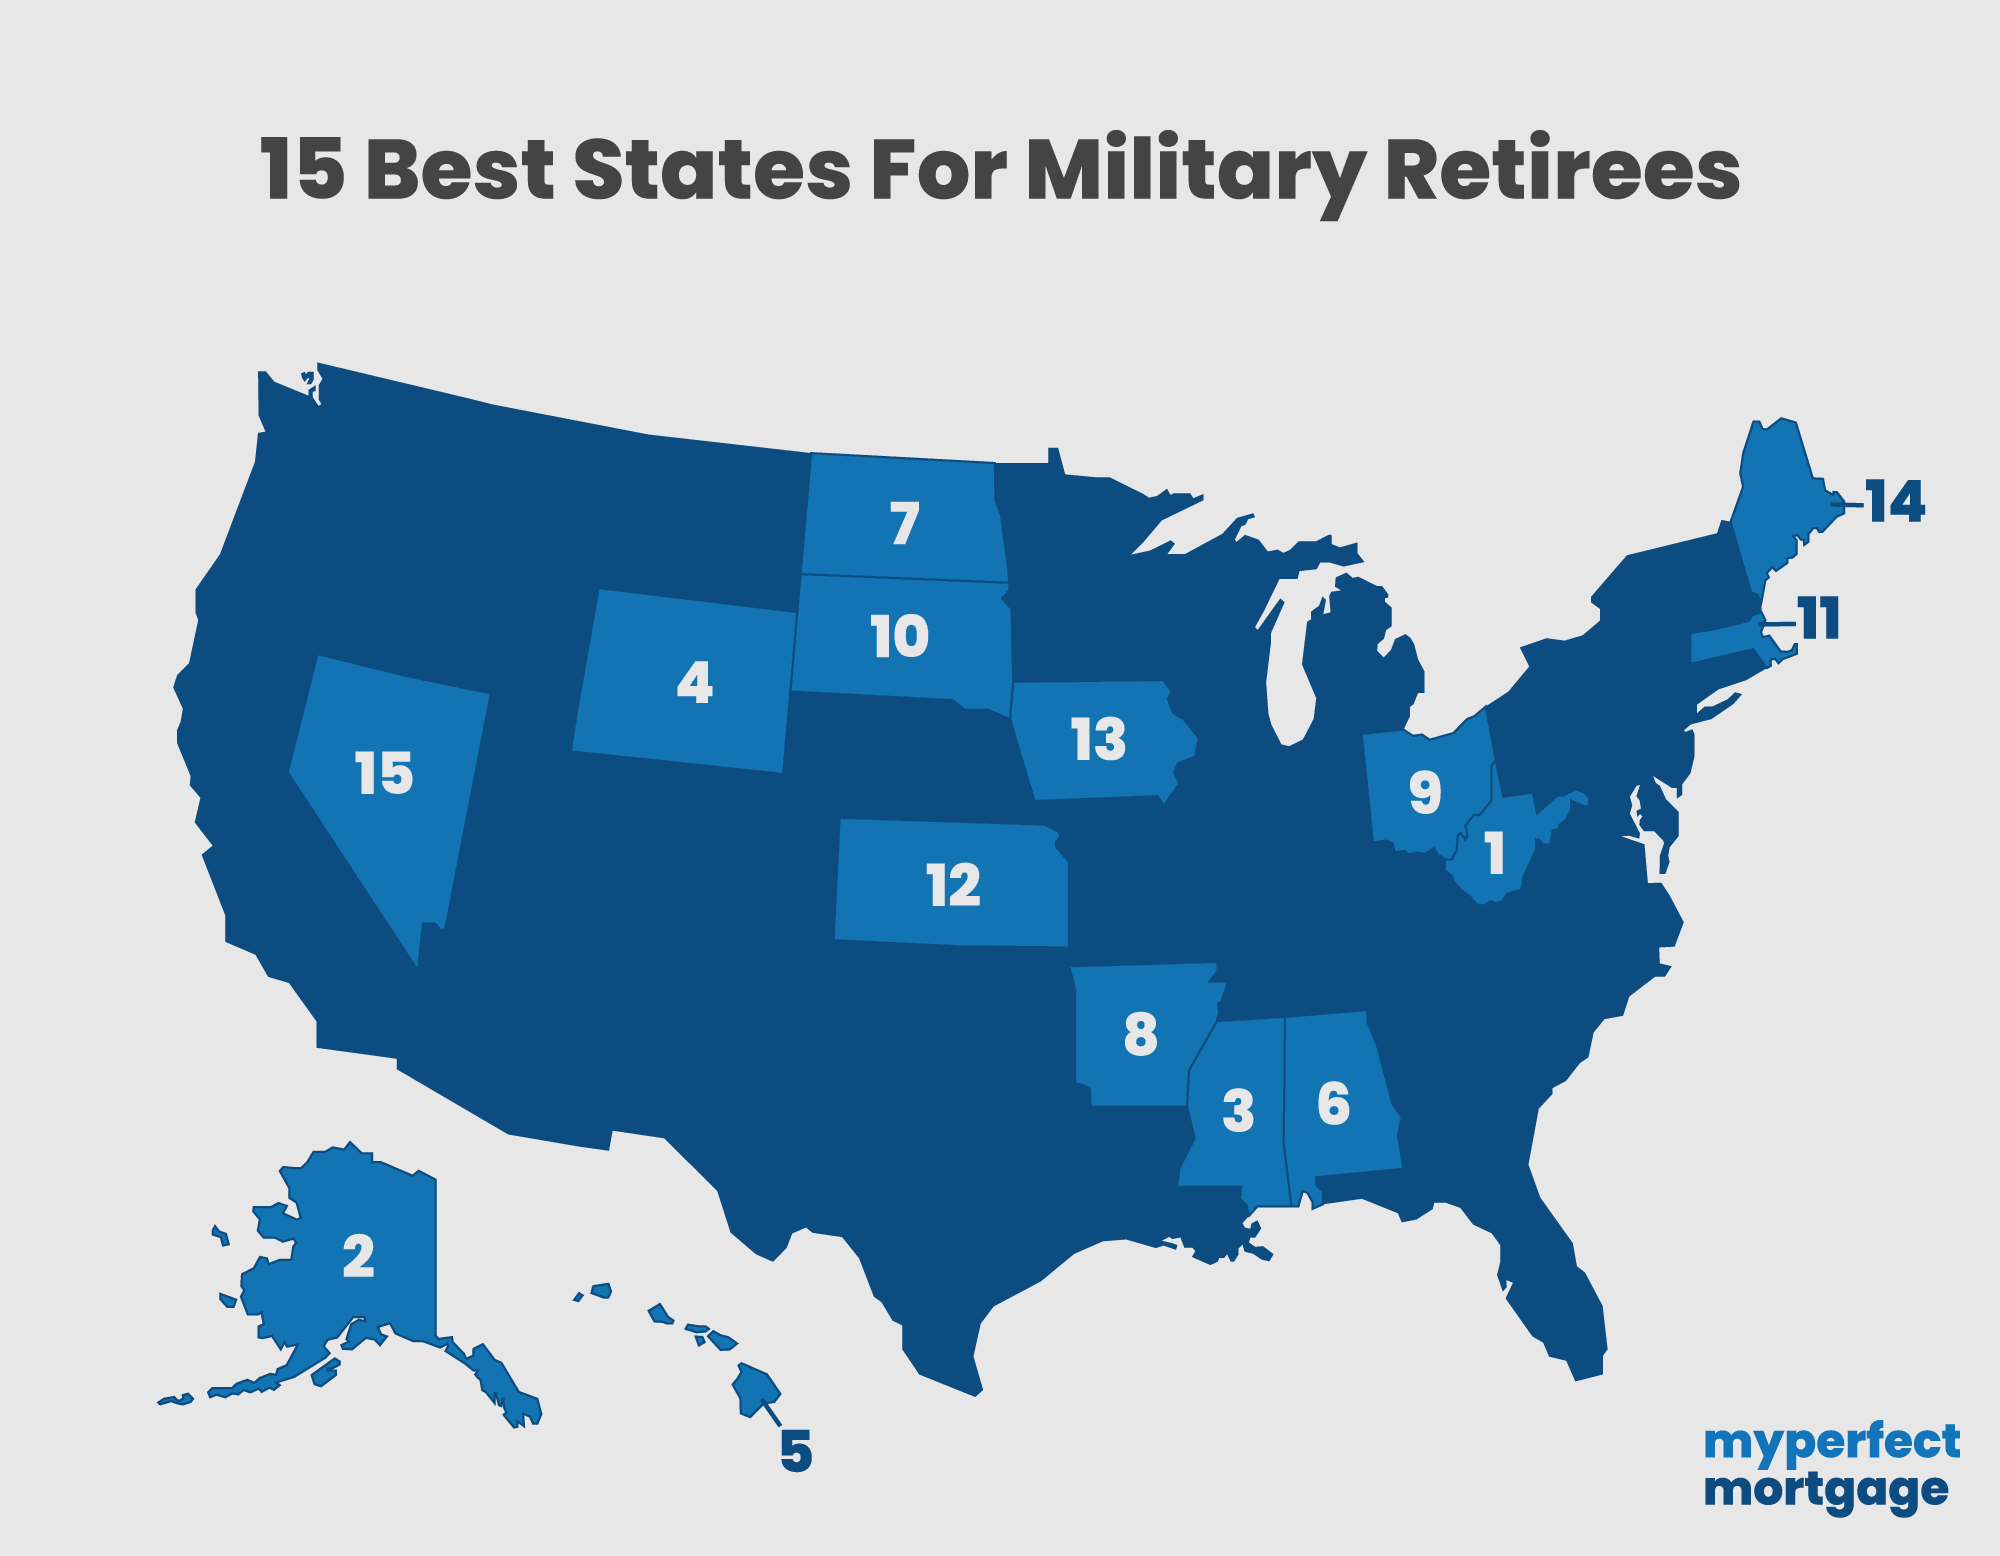 States for Military Retirees